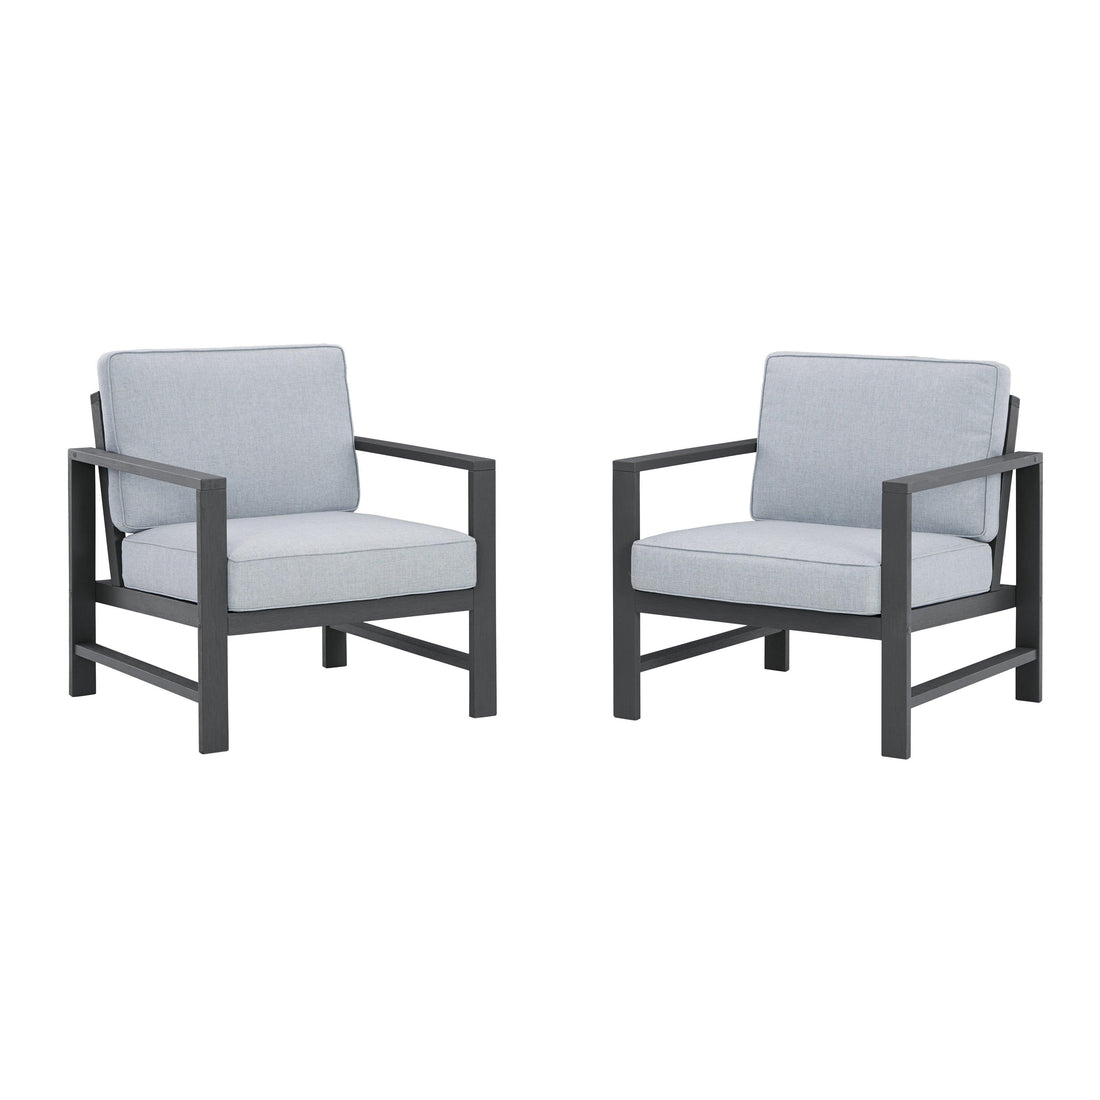 Fynnegan Lounge Chair with Cushion (Set of 2) Ash-P349-821